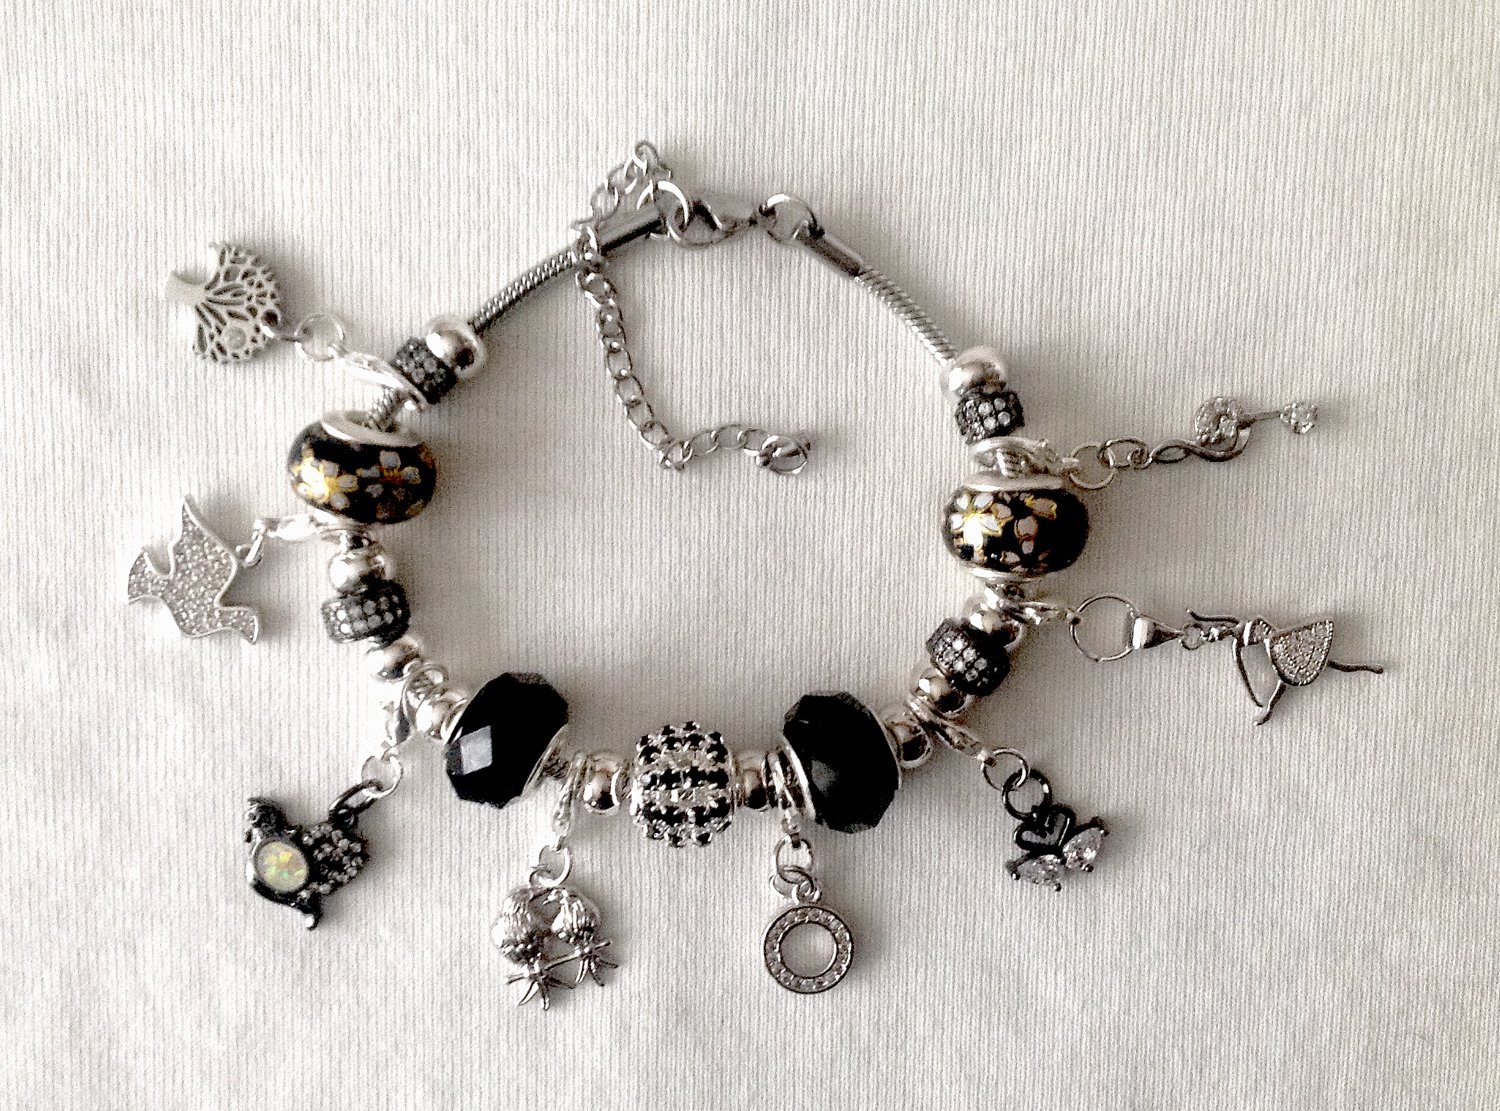 Days of Christmas Cubic Zirconia European Style Charm Bracelet in Silver, Black and White